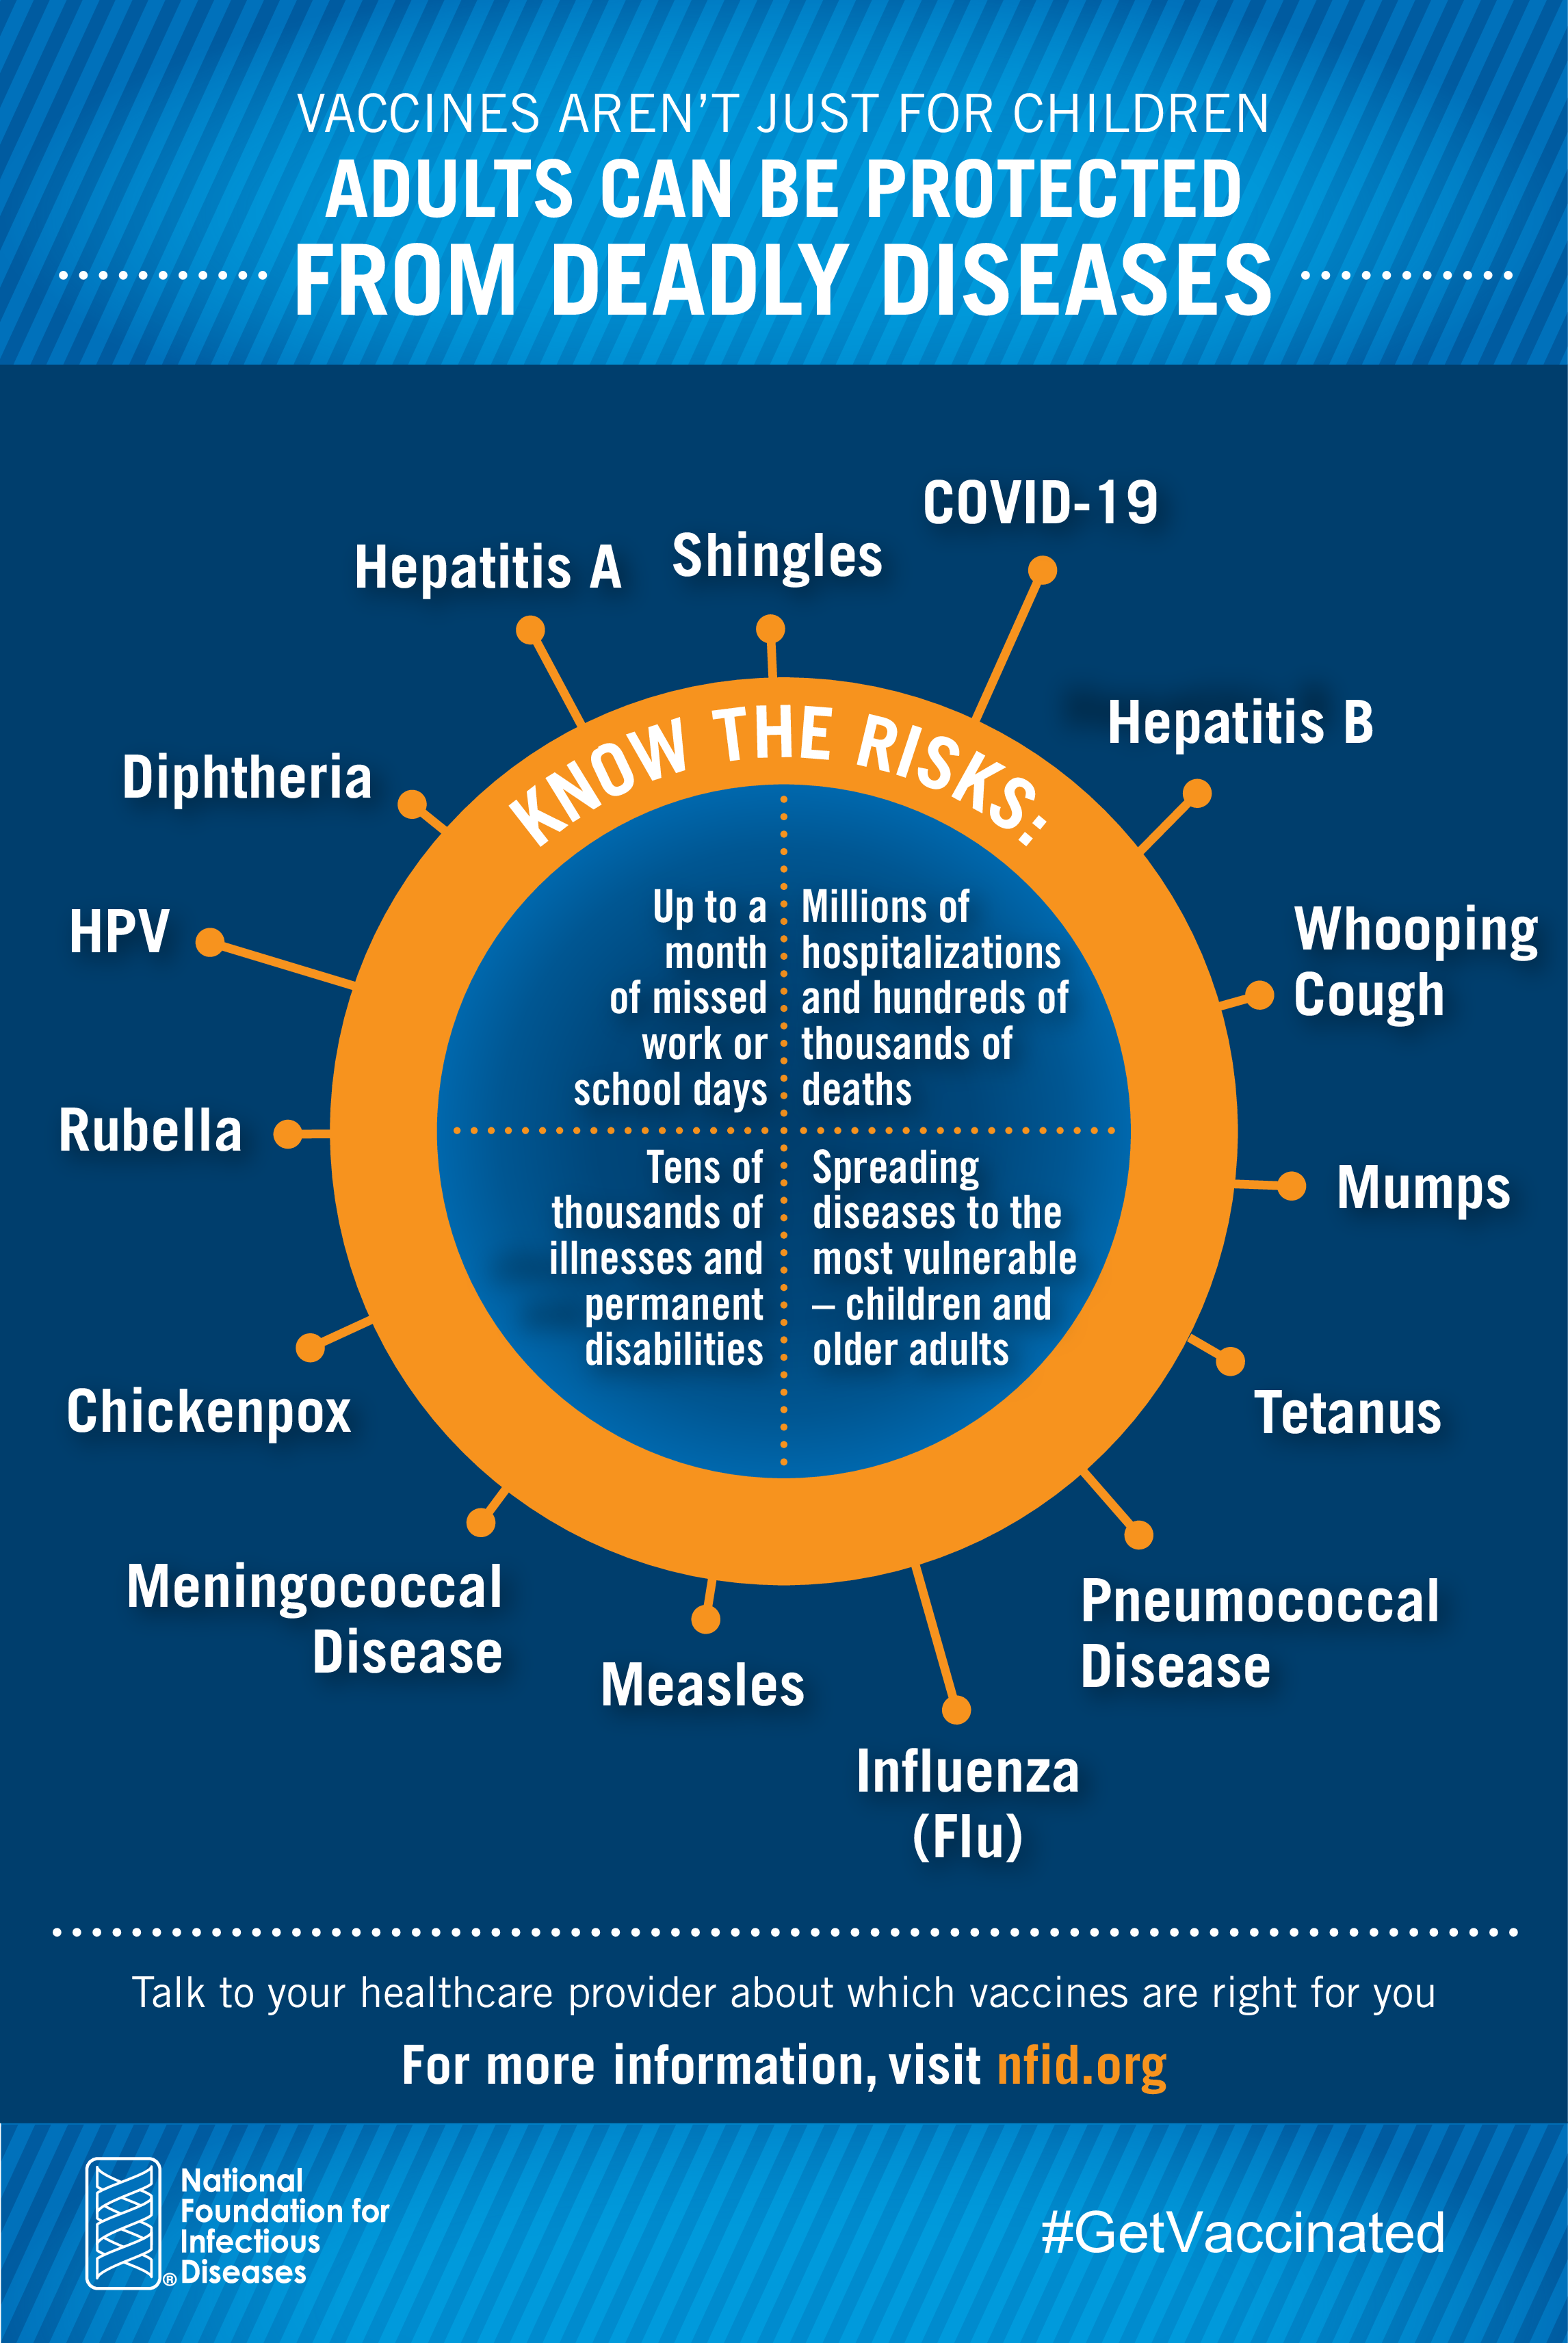 An orange circle has multiple branches which point to the names of various adult vaccines. The bottom left corner has the National Foundation for Infectious Diseases logo and the bottom right corner has #getvaccinated.